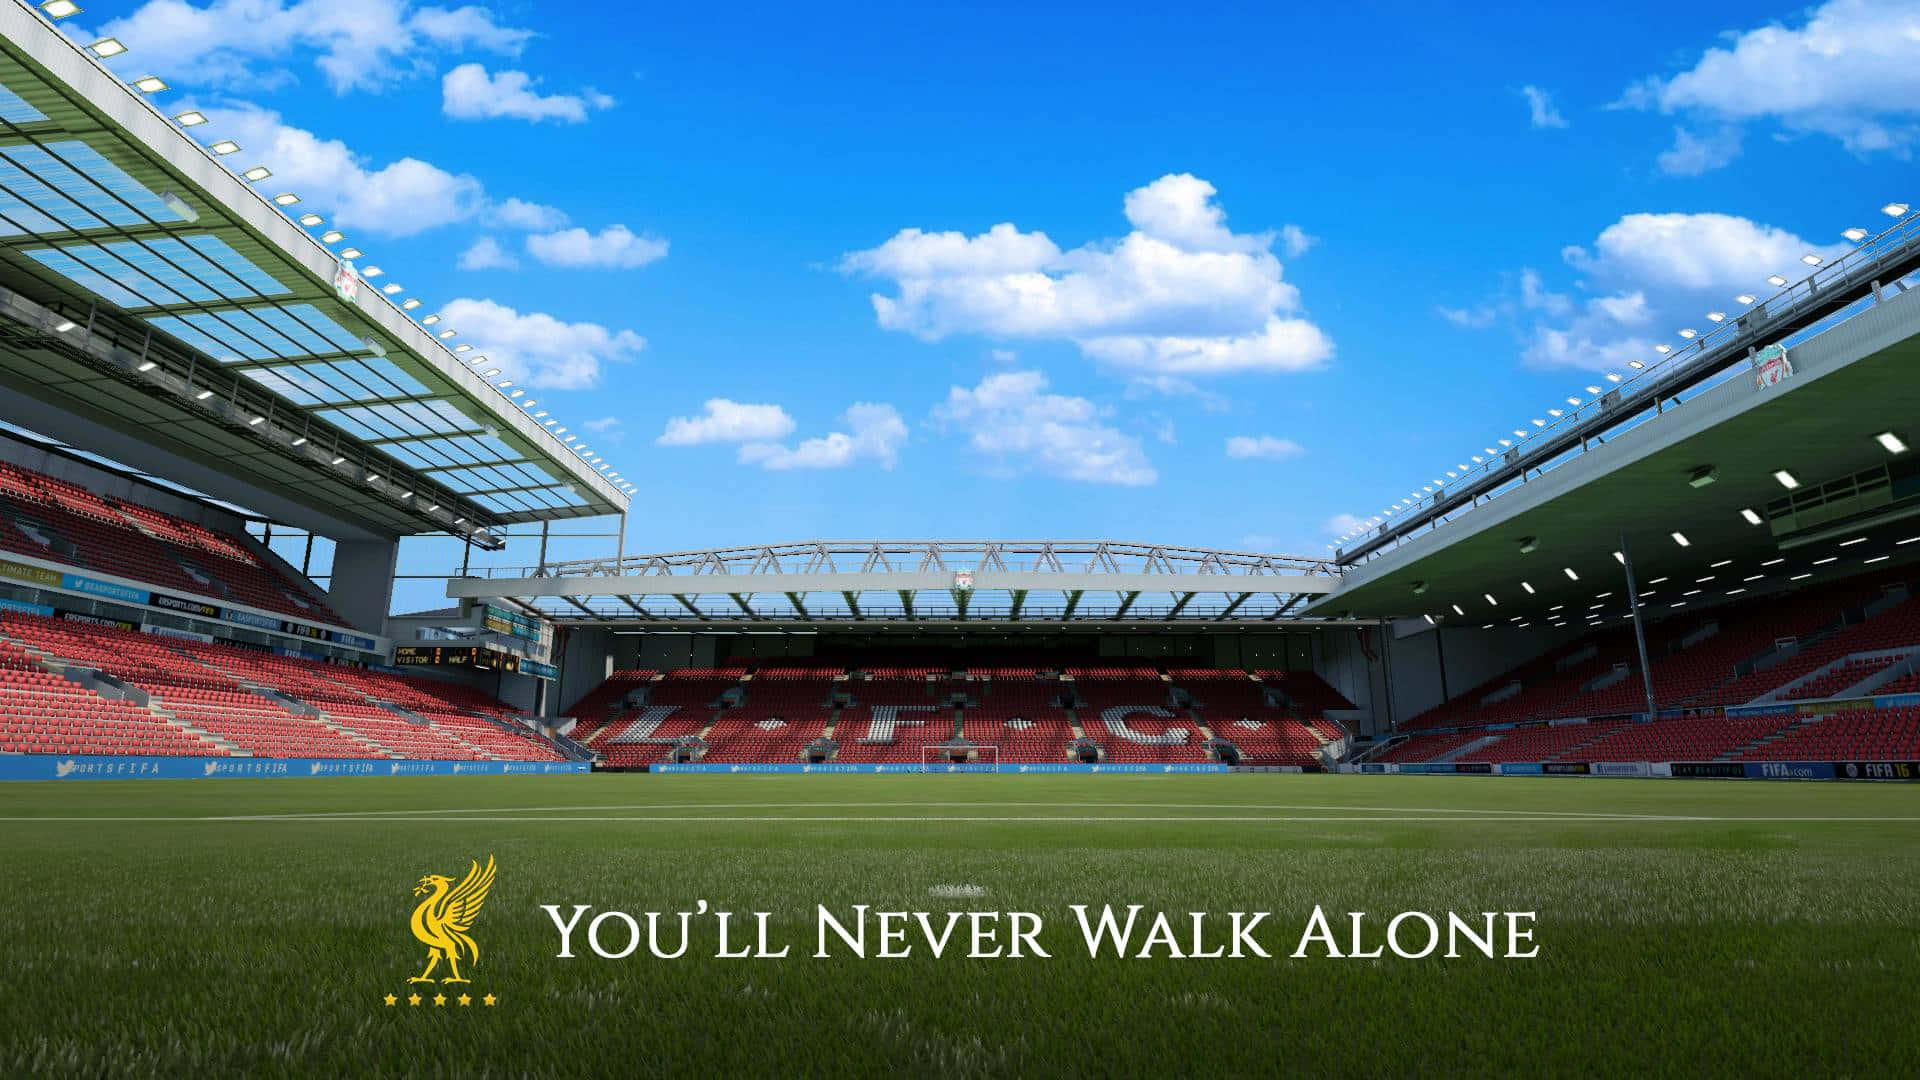 Anfield Stadium Liverpool Youll Never Walk Alone Wallpaper